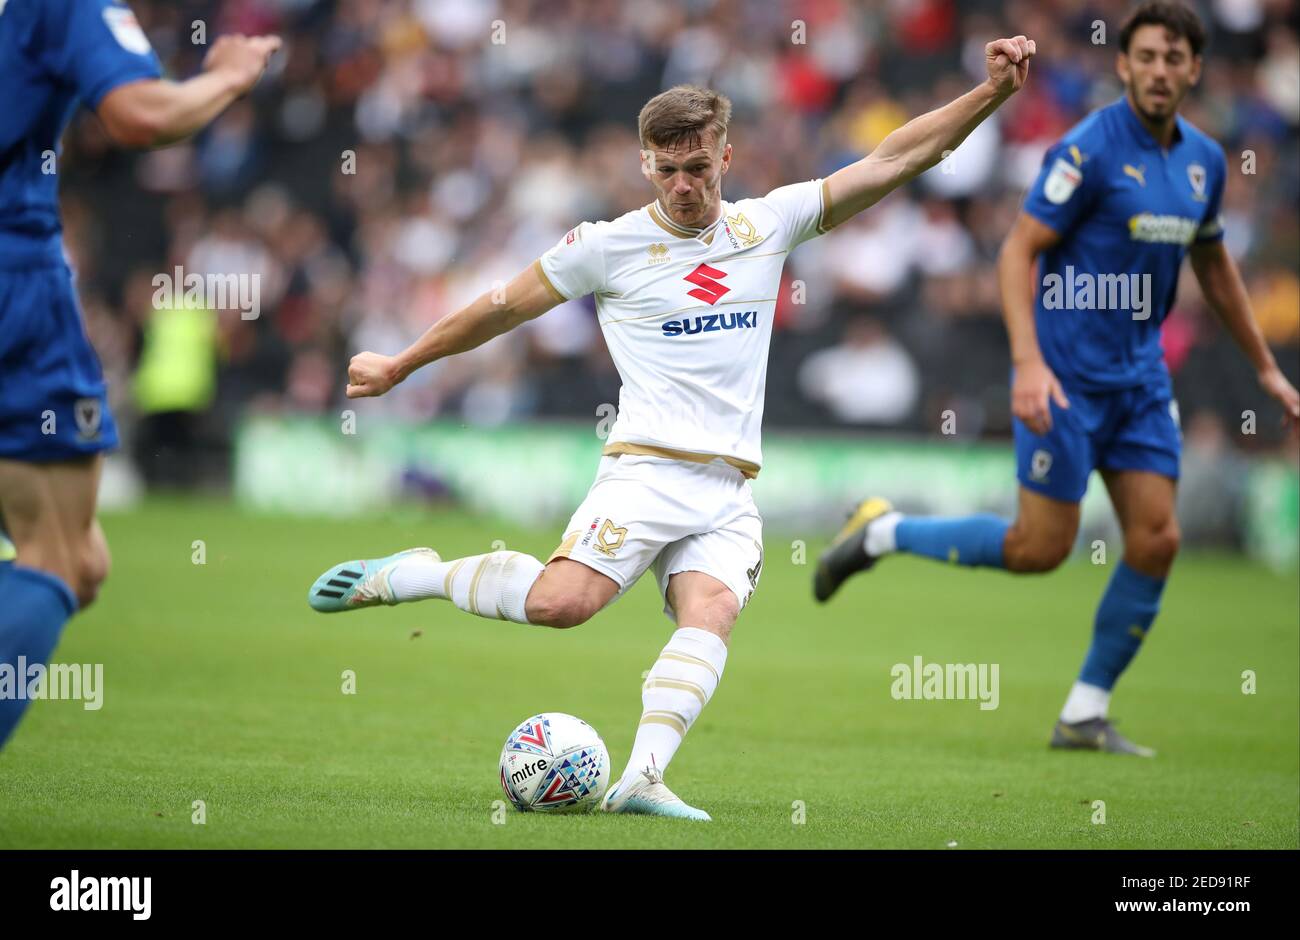 Soccer Football - League One - Milton Keynes Dons v AFC Wimbledon - Stadium MK, Milton Keynes, Britain - September 7, 2019   MK Dons' Rhys Healey scores their second goal   Action Images/Peter Cziborra    EDITORIAL USE ONLY. No use with unauthorized audio, video, data, fixture lists, club/league logos or 'live' services. Online in-match use limited to 75 images, no video emulation. No use in betting, games or single club/league/player publications.  Please contact your account representative for further details. Stock Photo